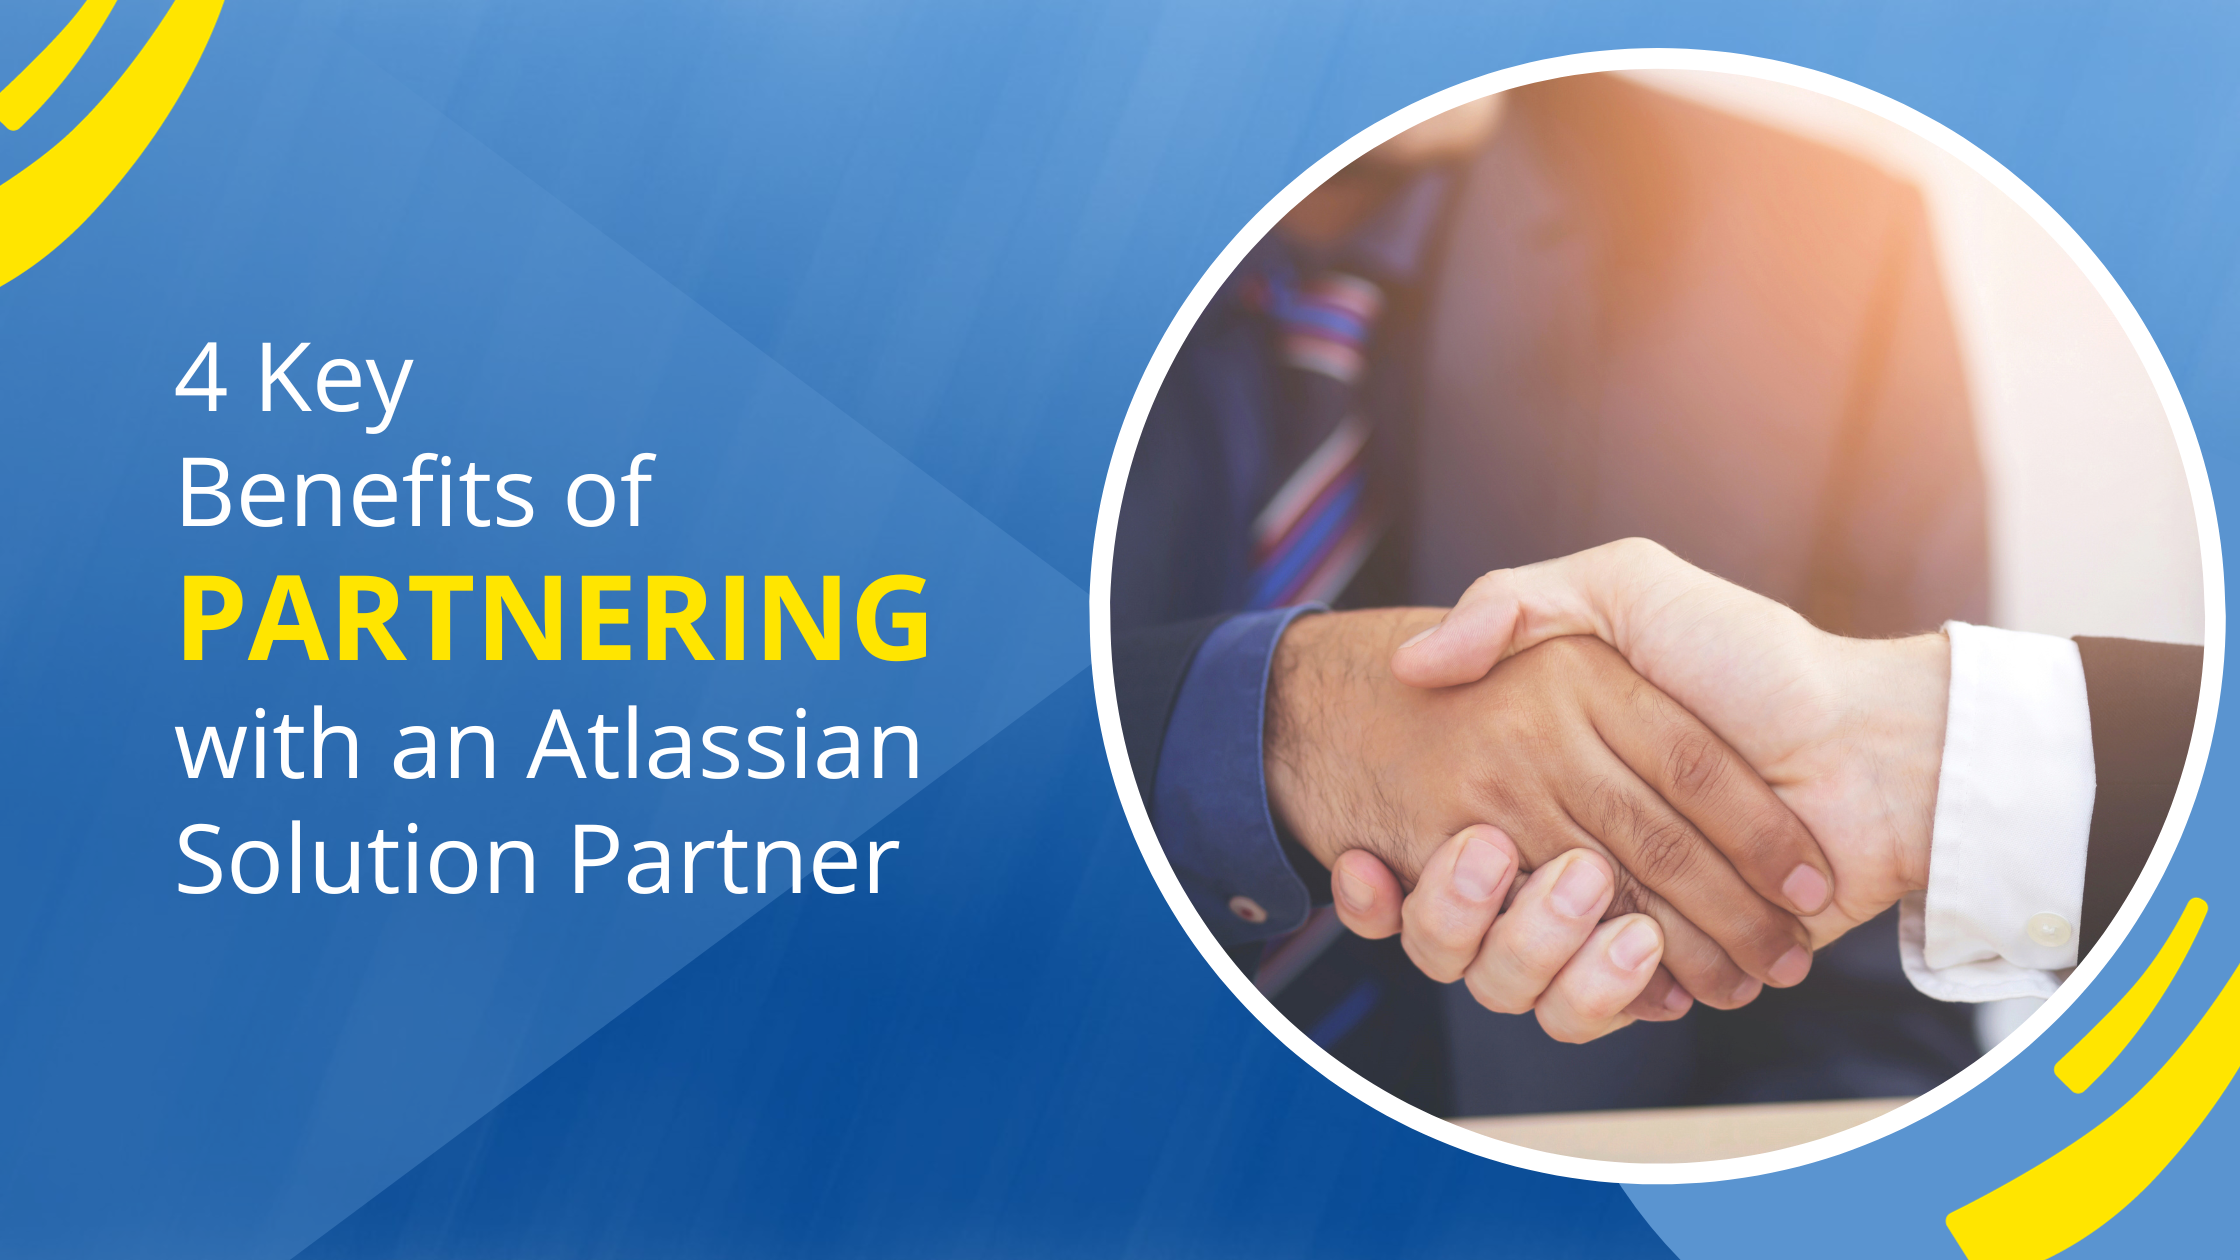 4 Key Benefits of Partnering with an Atlassian Solution Partner